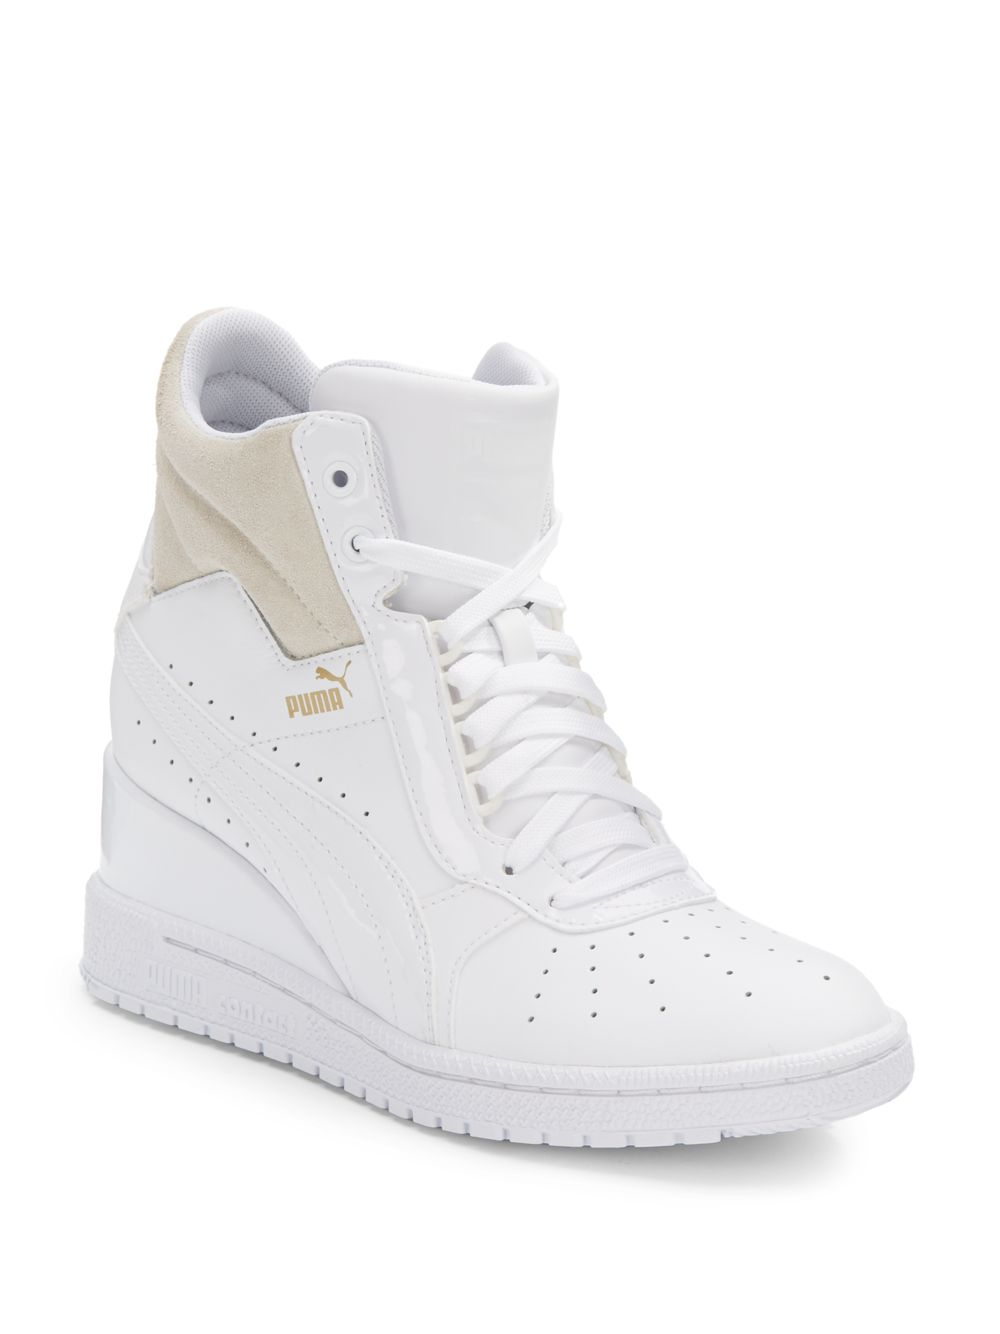 PUMA Advantage Leather Wedge Sneakers in White - Lyst